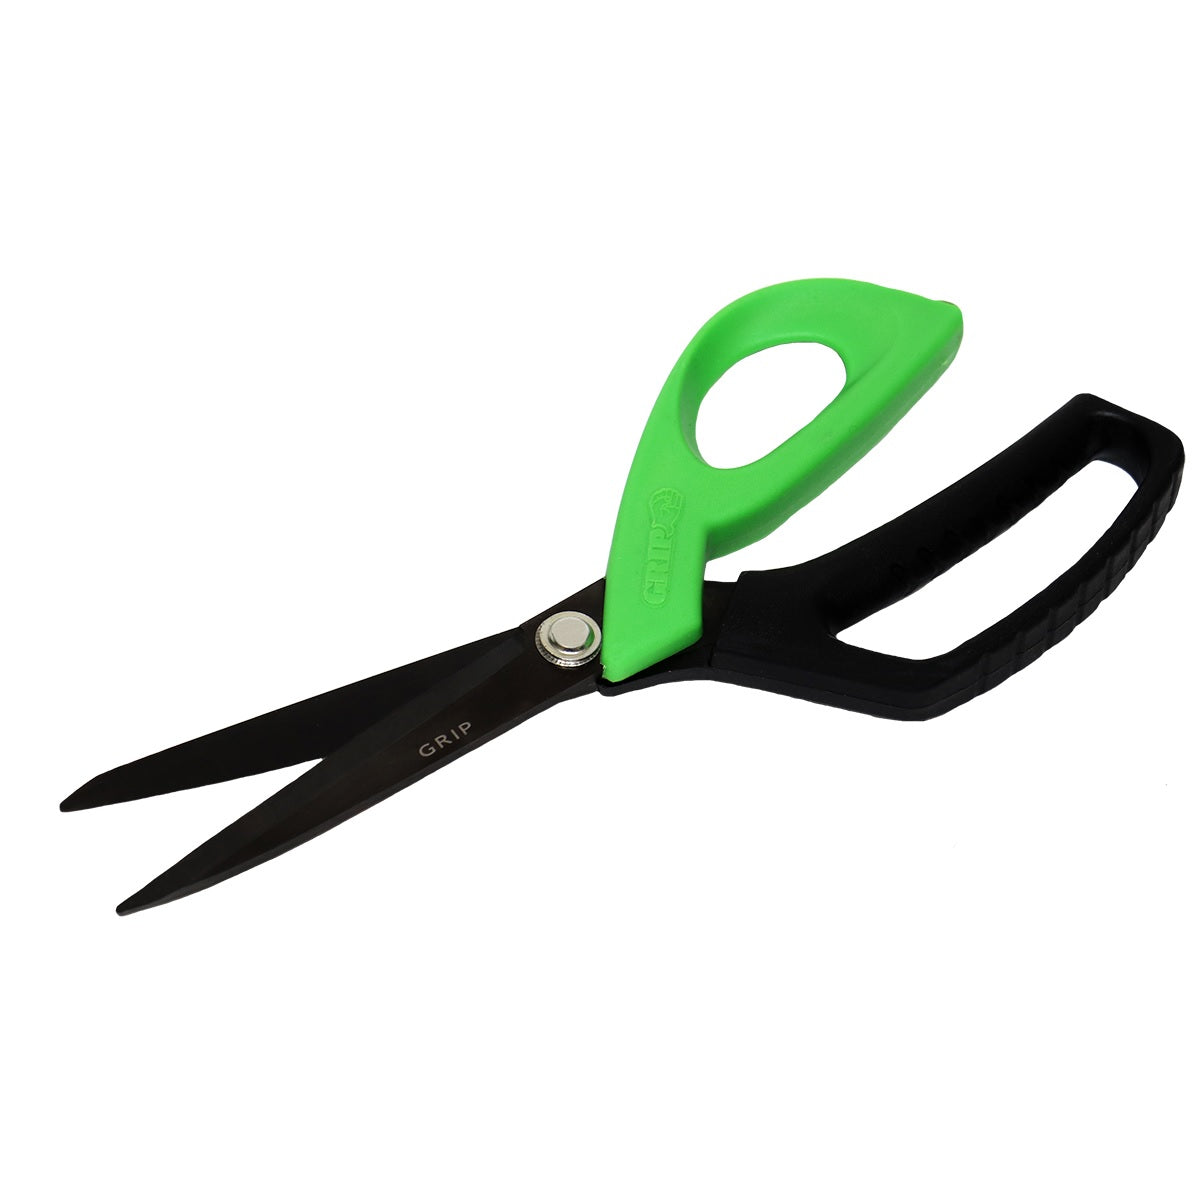 Grip On Tools 54110 Extra Heavy Duty Scissors, Stainless Steel